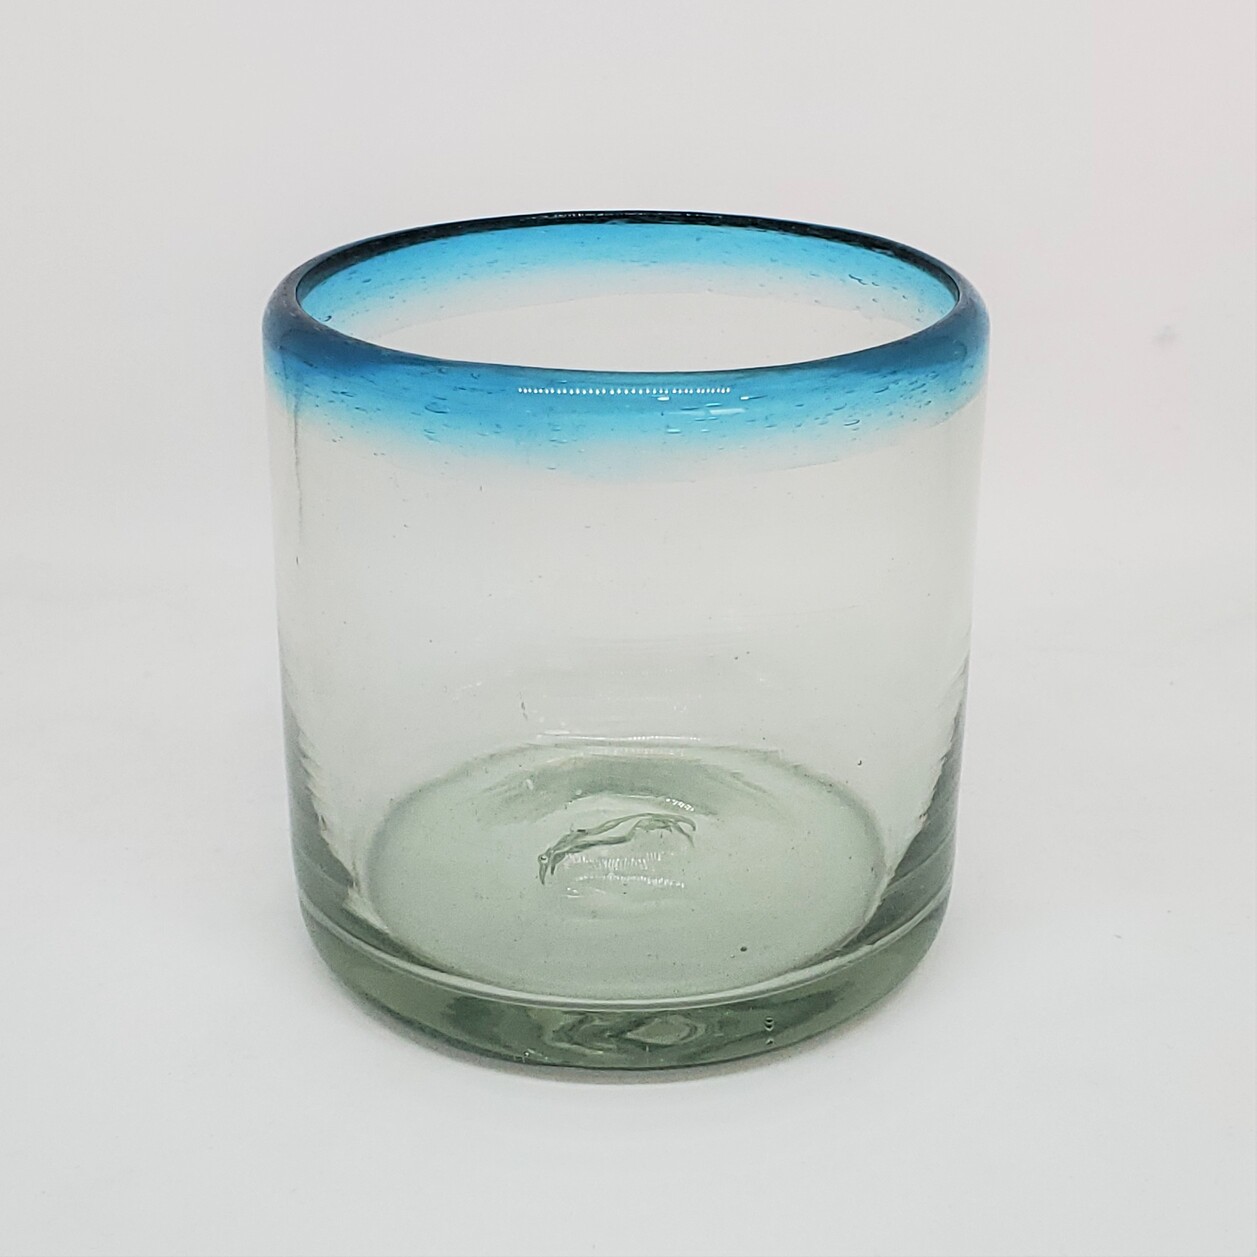 MEXICAN GLASSWARE / Aqua Blue Rim 8 oz DOF Rock Glasses (set of 6) / These glasses are just the right size to enjoy fresh squeezed fruit juice in the moning.